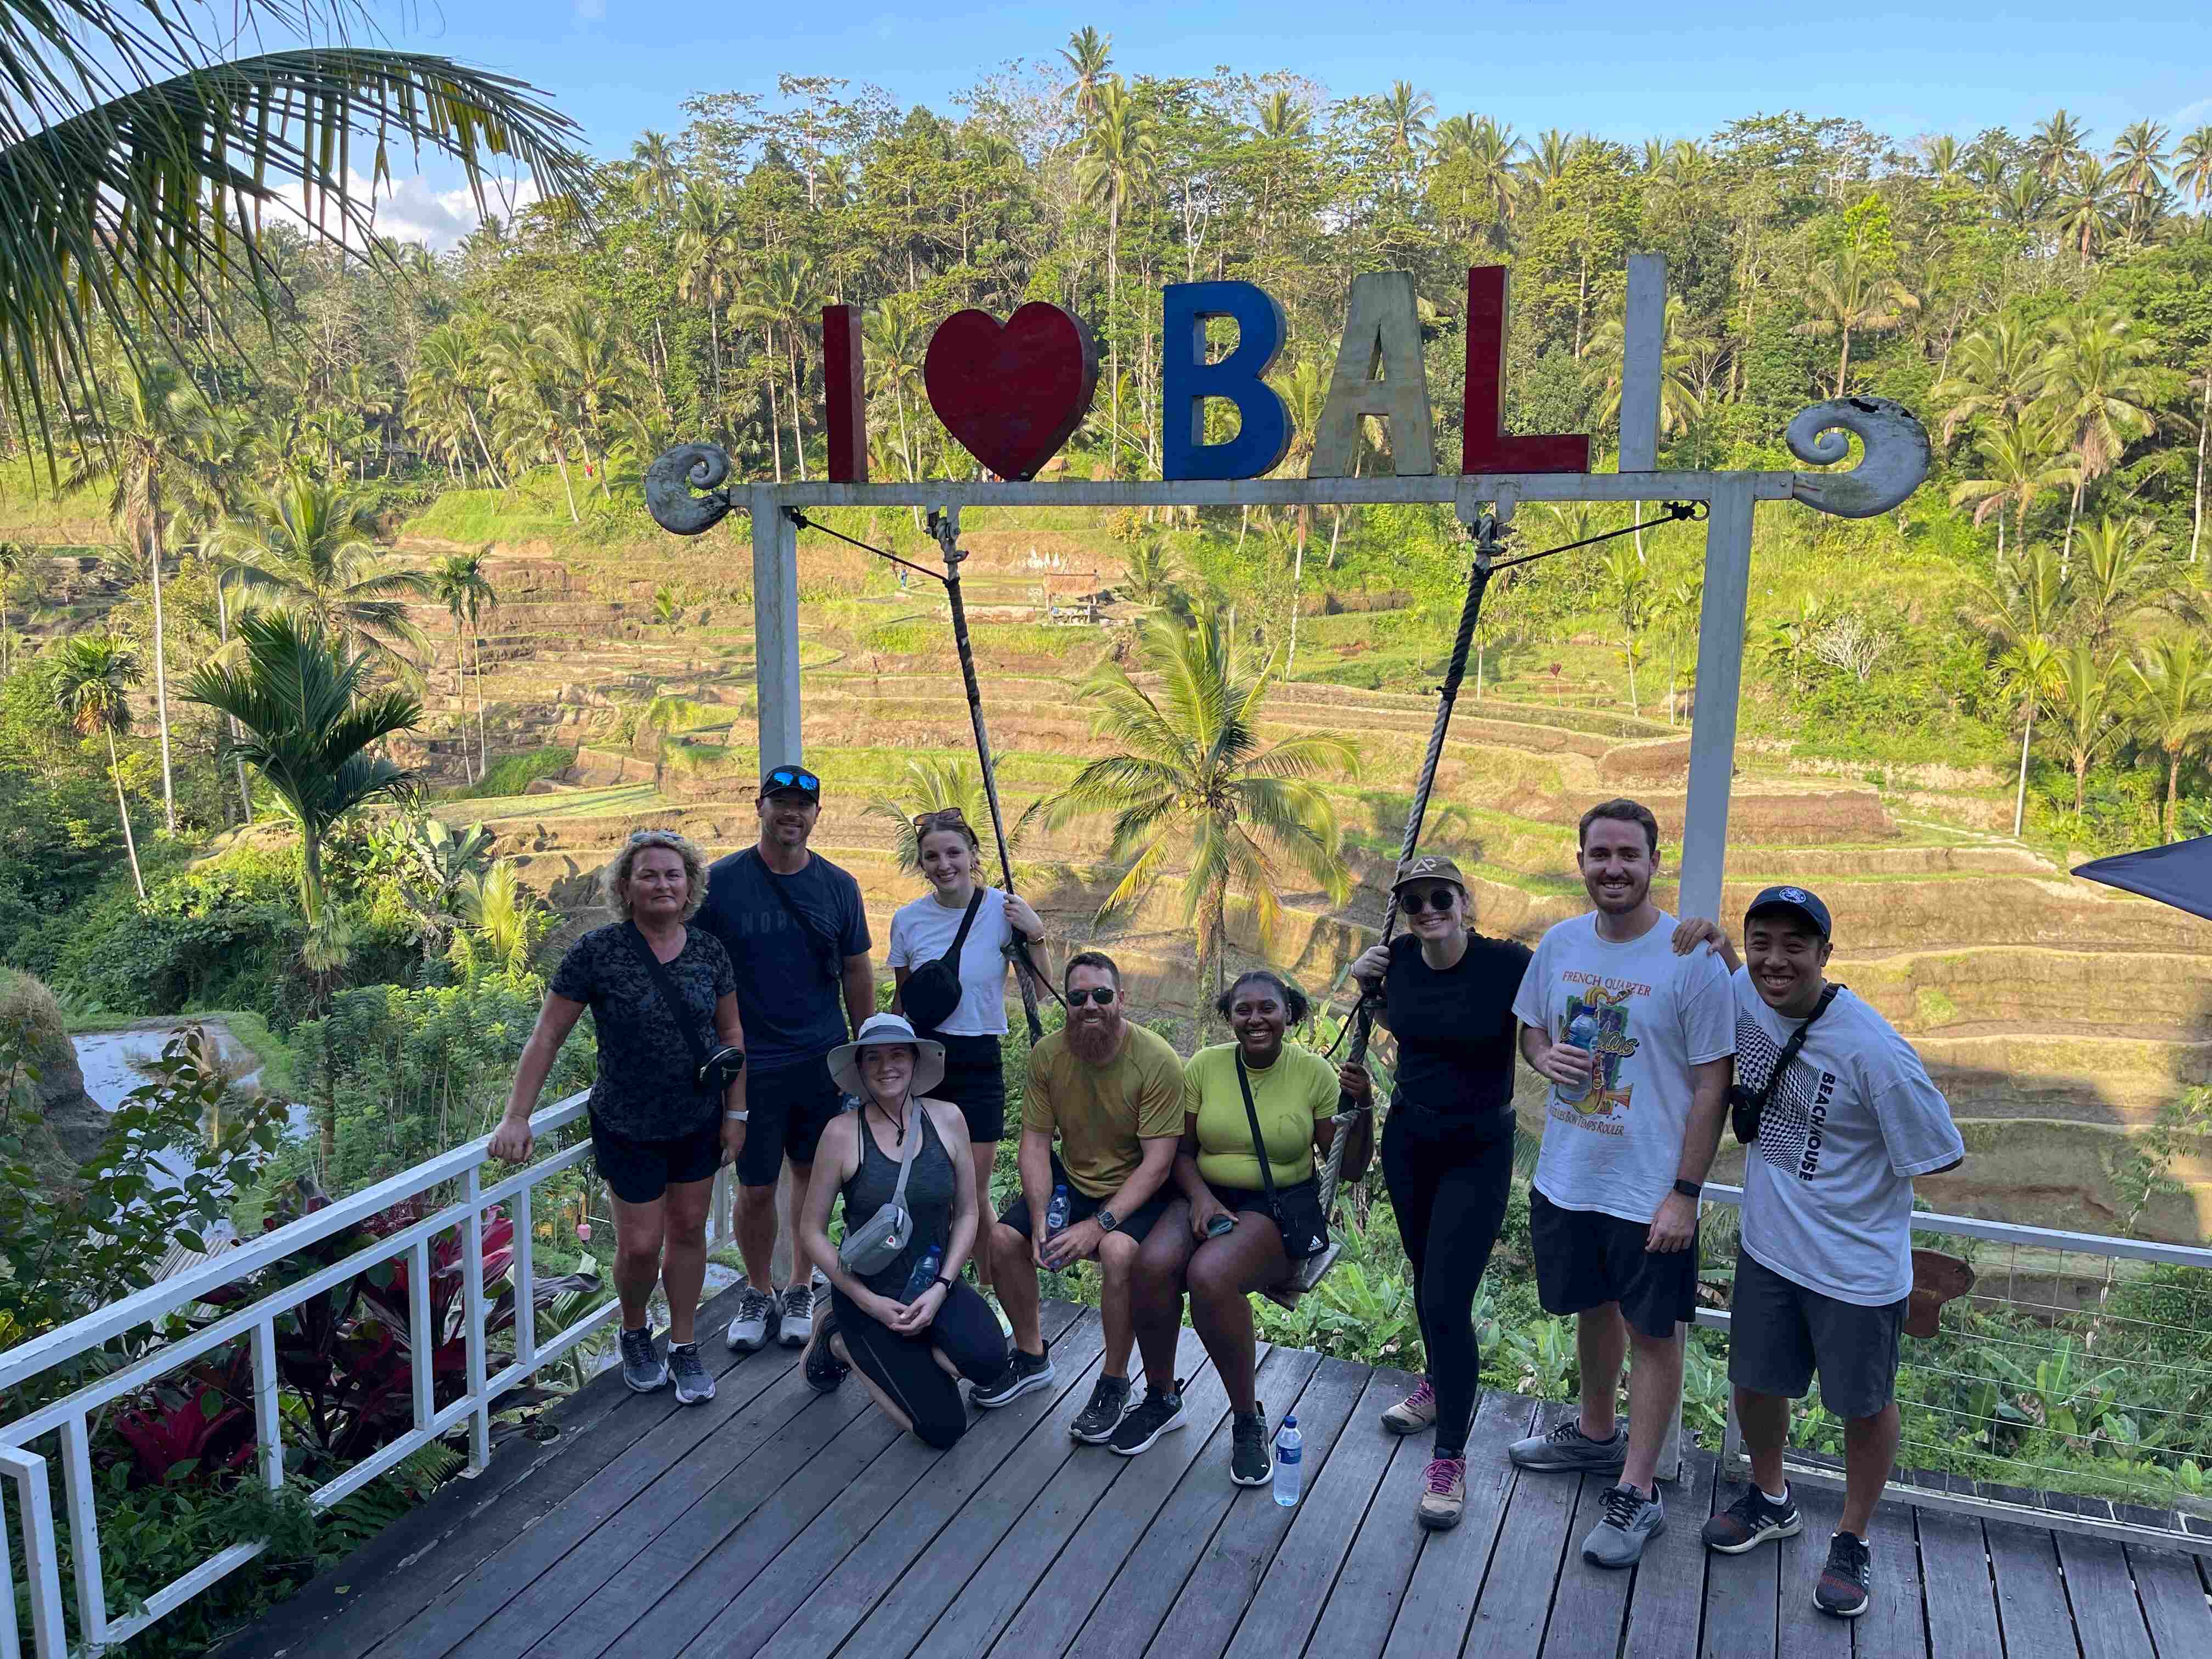 The team vacationing in Bali.